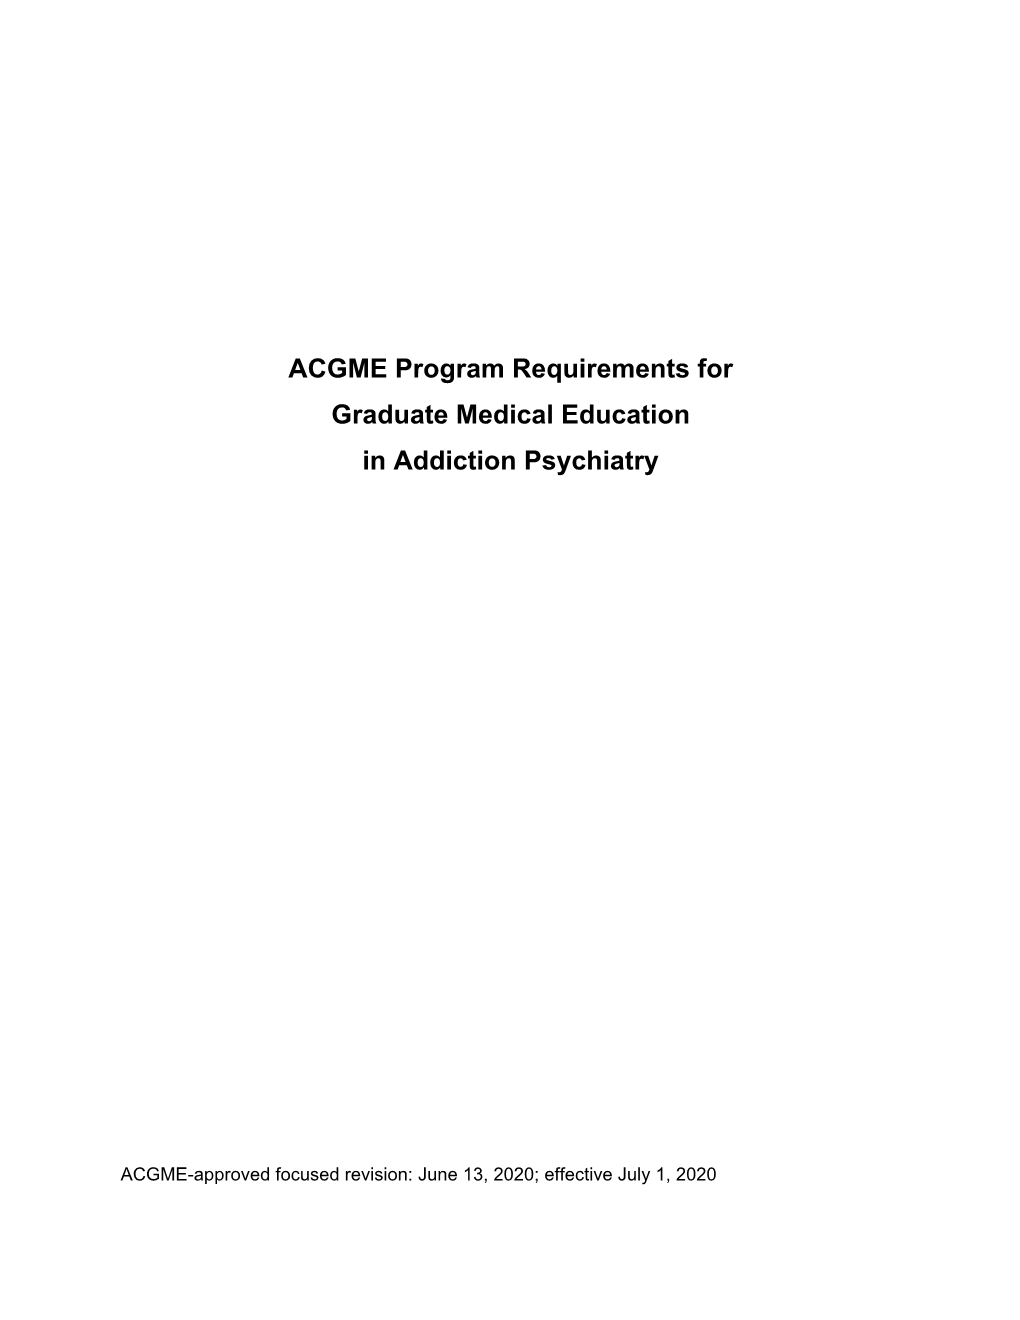 ACGME Program Requirements for Graduate Medical Education in Addiction Psychiatry